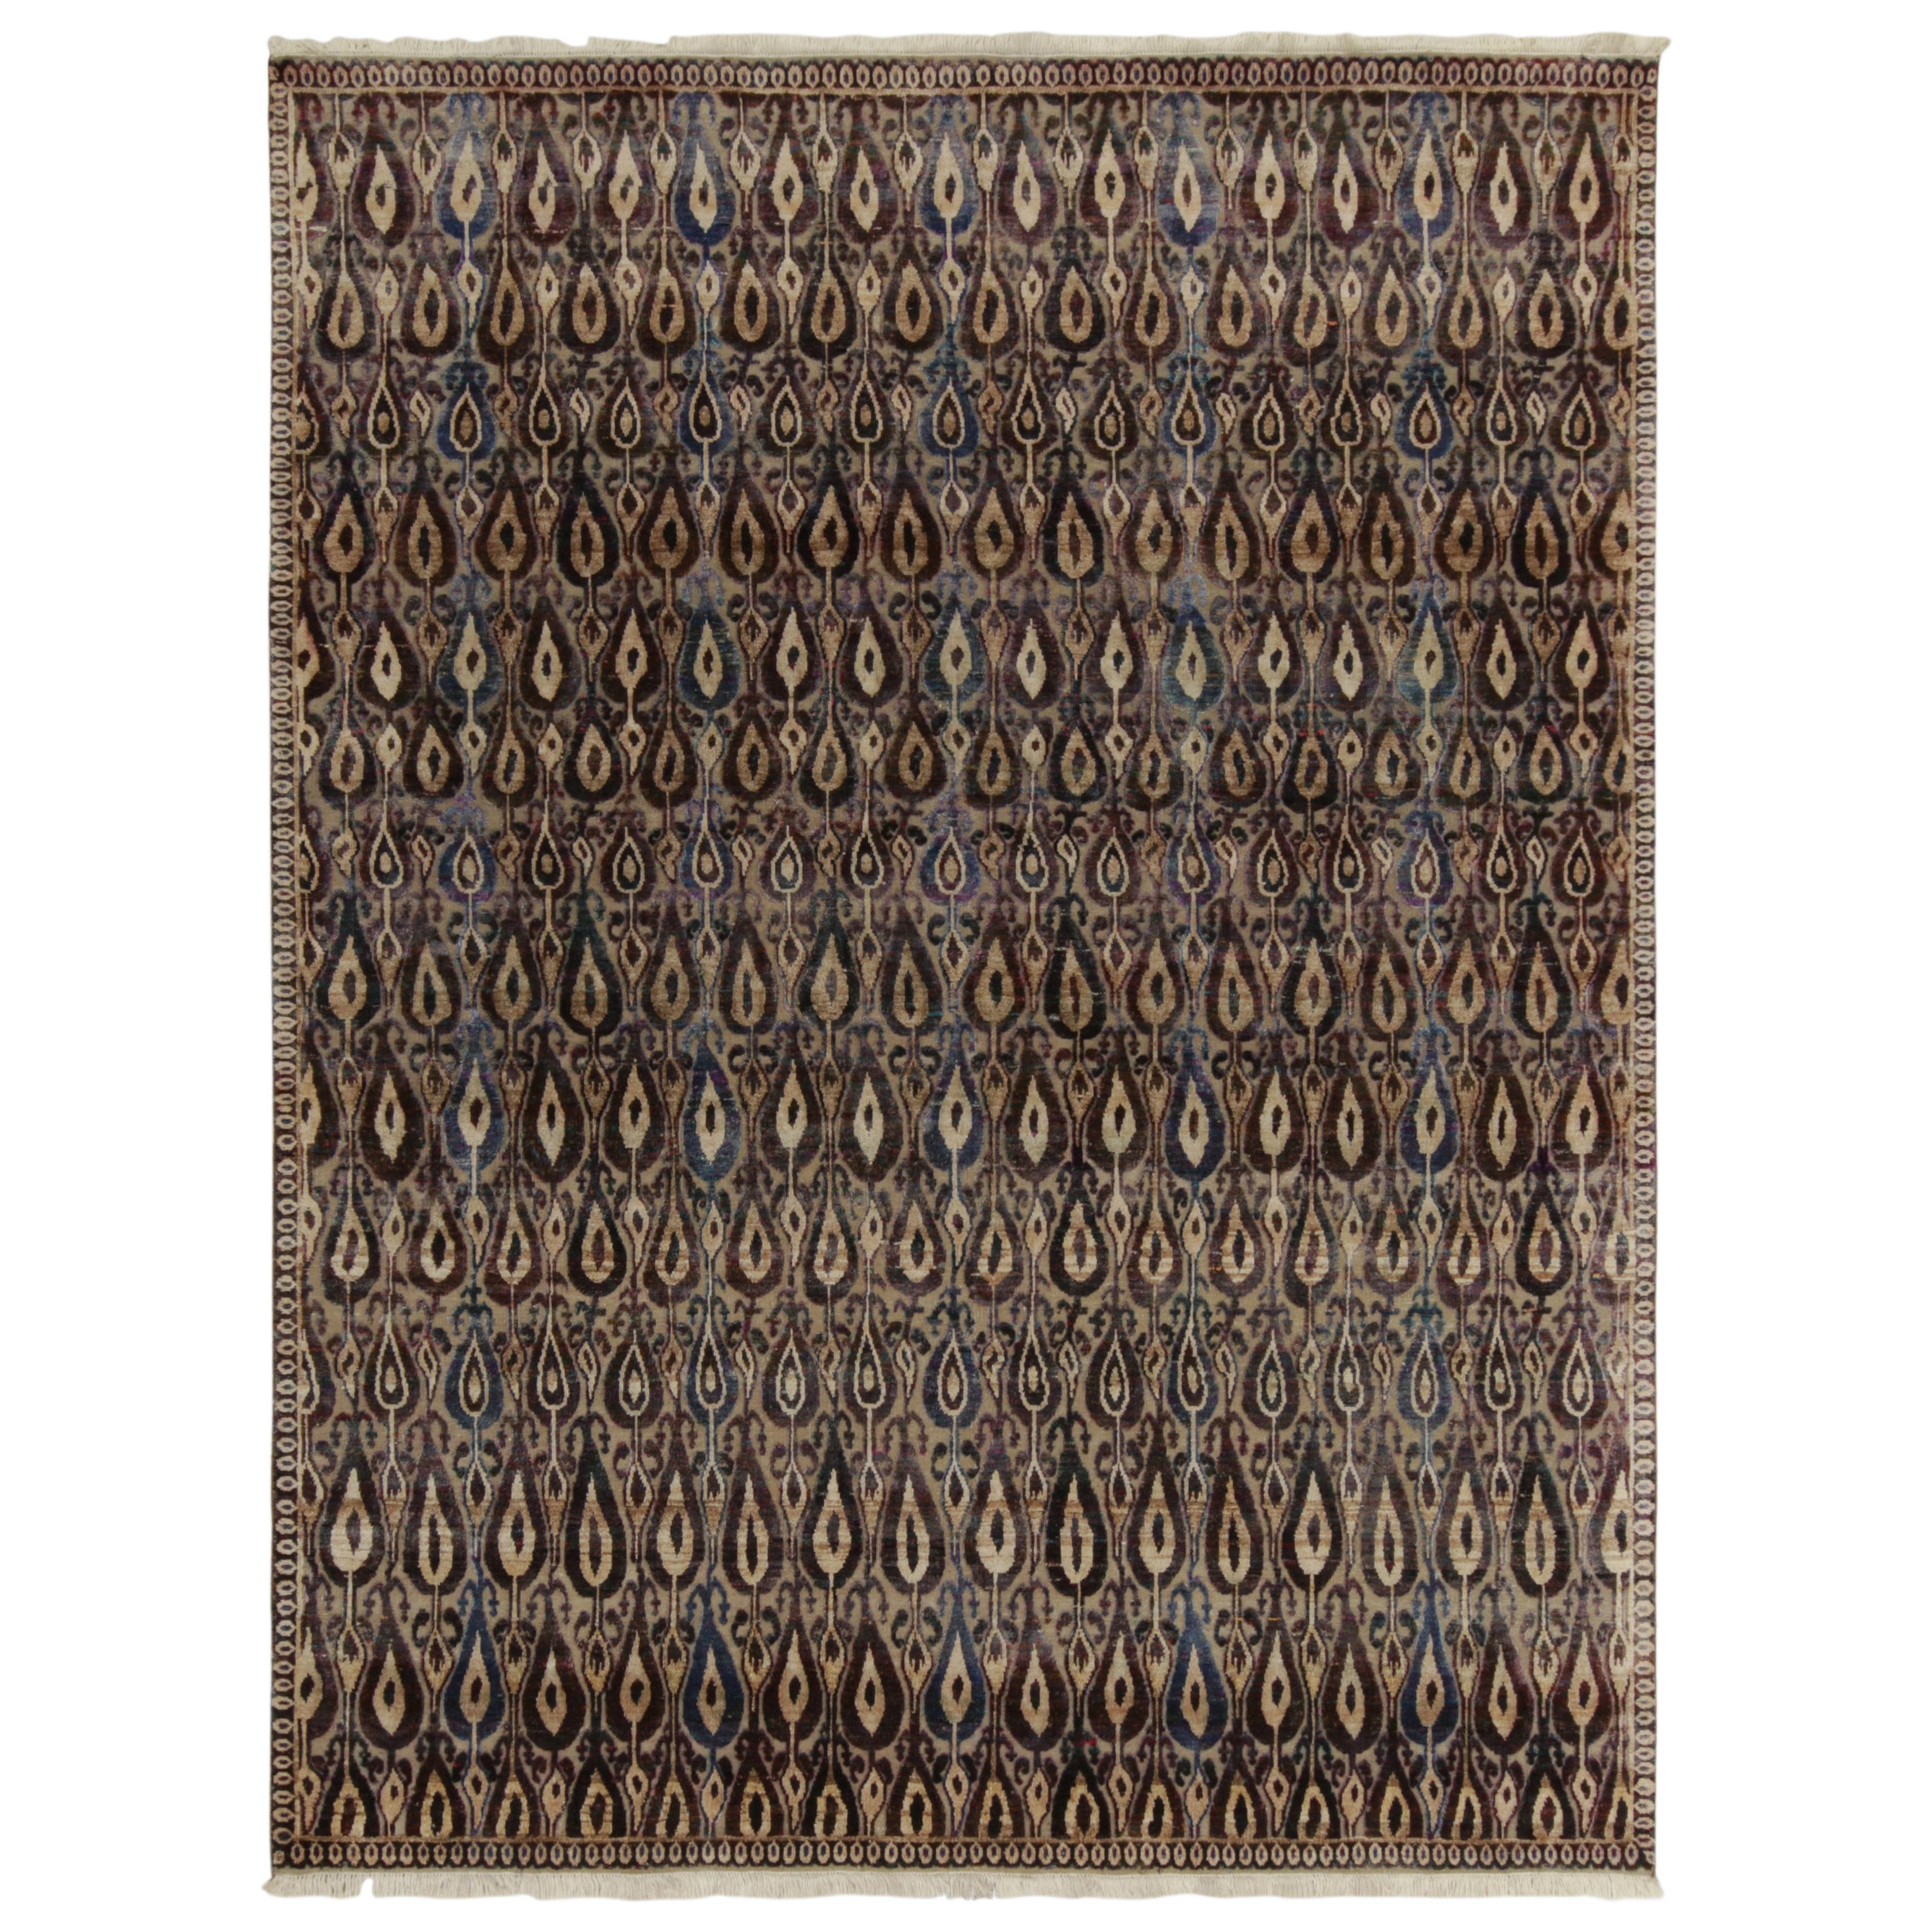 Rug & Kilim’s Classic Style Rug in Beige-Brown, Red and Blue Ikats Patterns For Sale